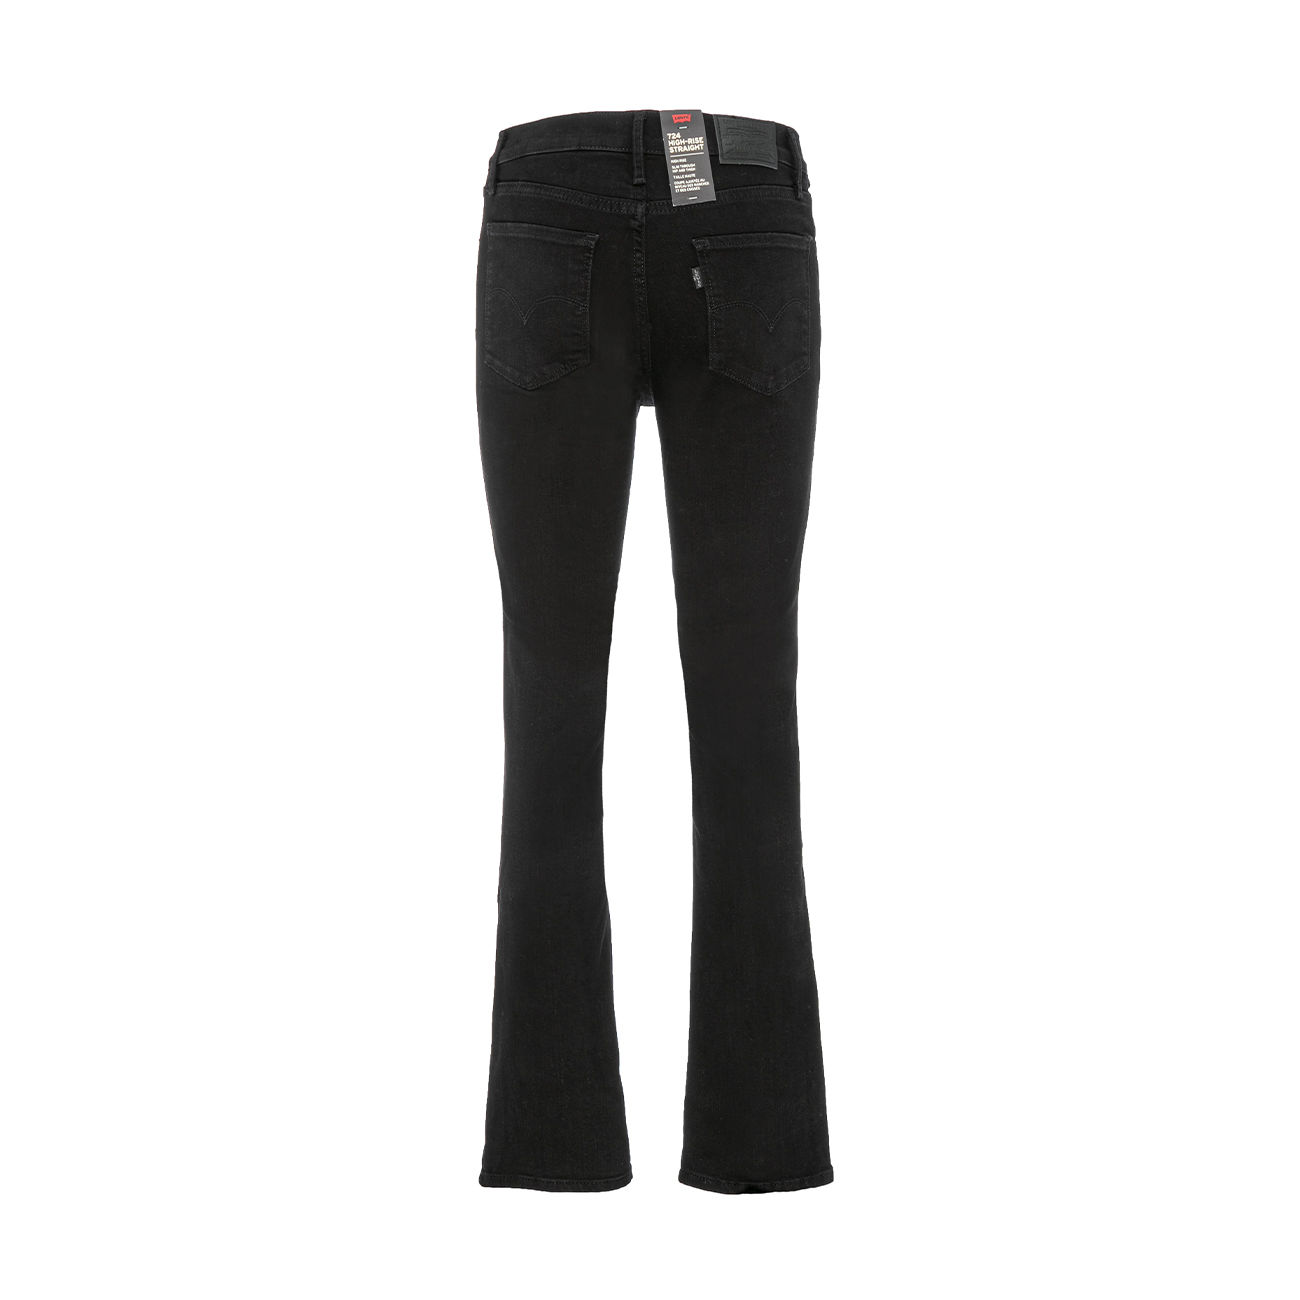 LEVIS 724 HIGH RISE STRAIGHT JEANS Woman Night Black